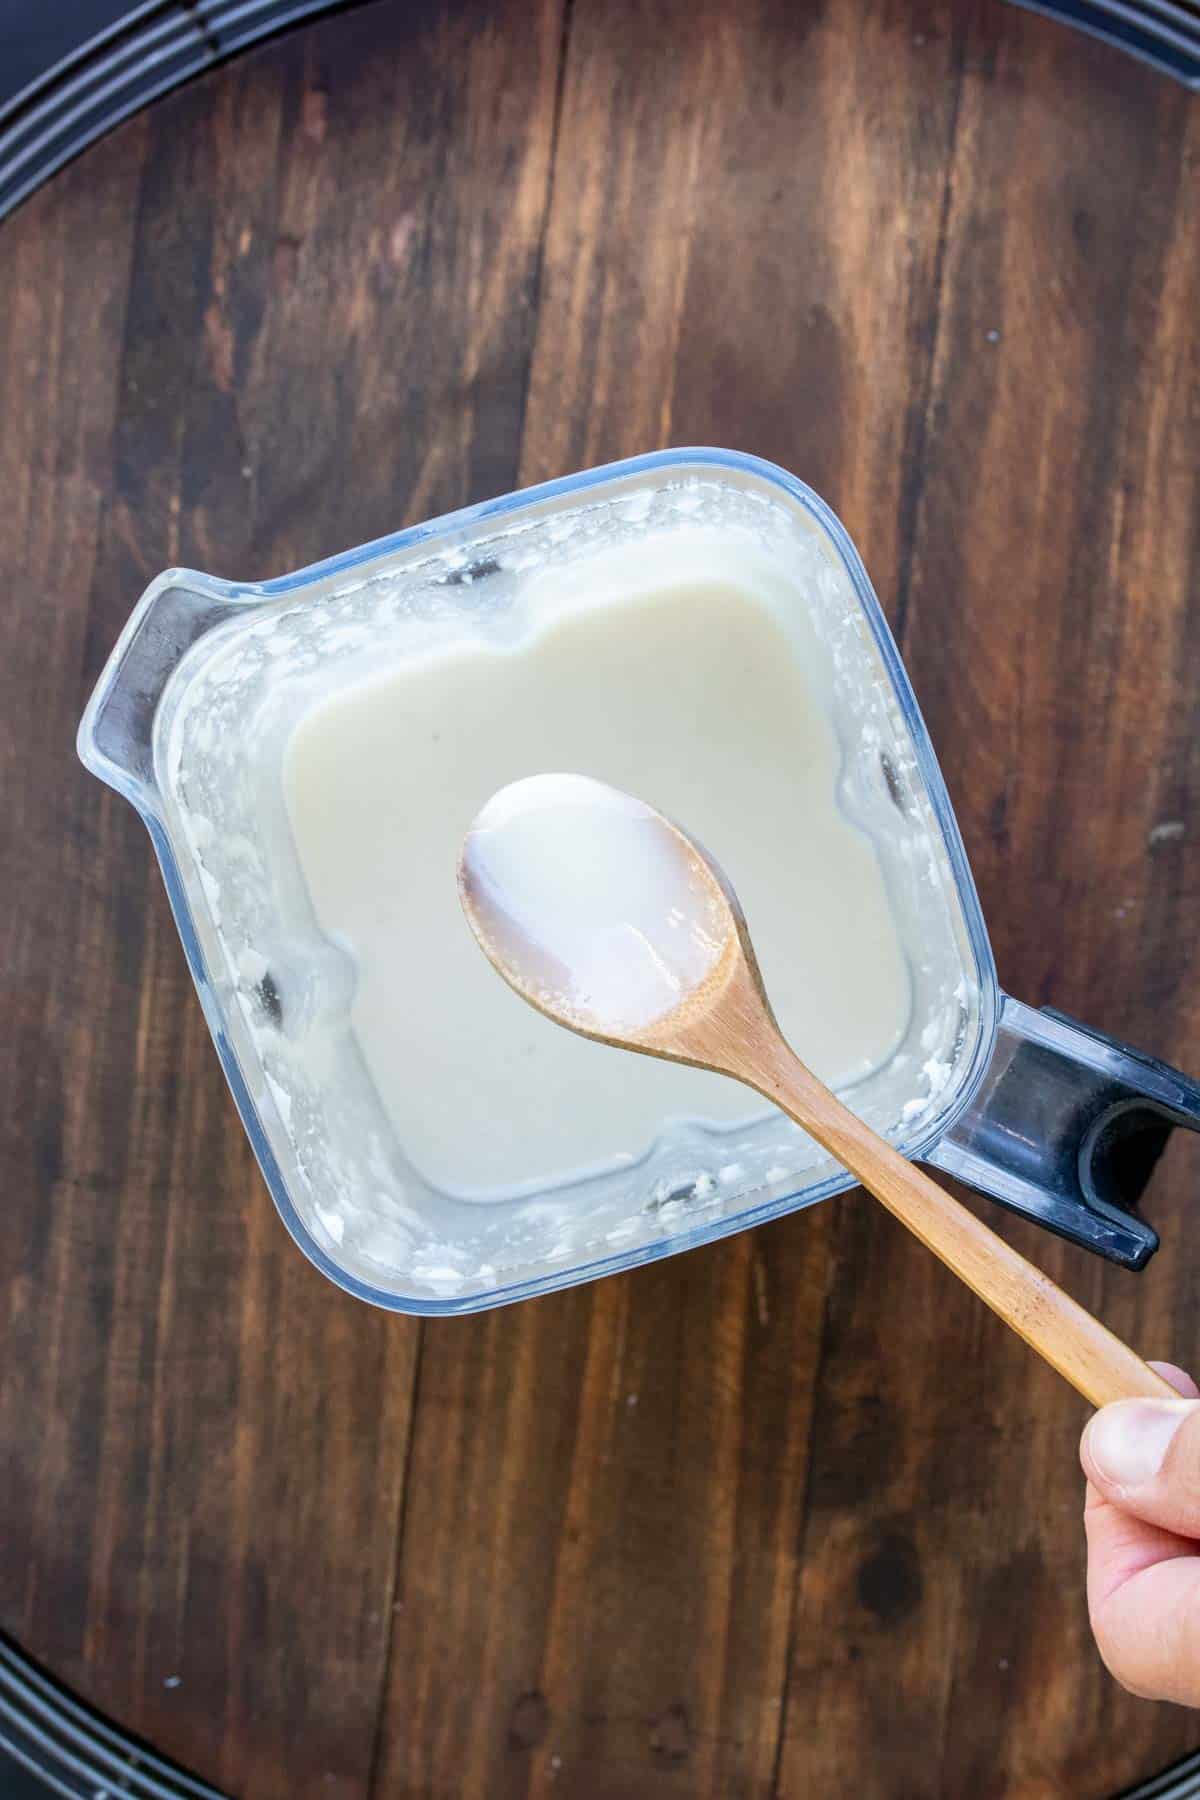 Wooden spoon taken coconut butter out of a blender